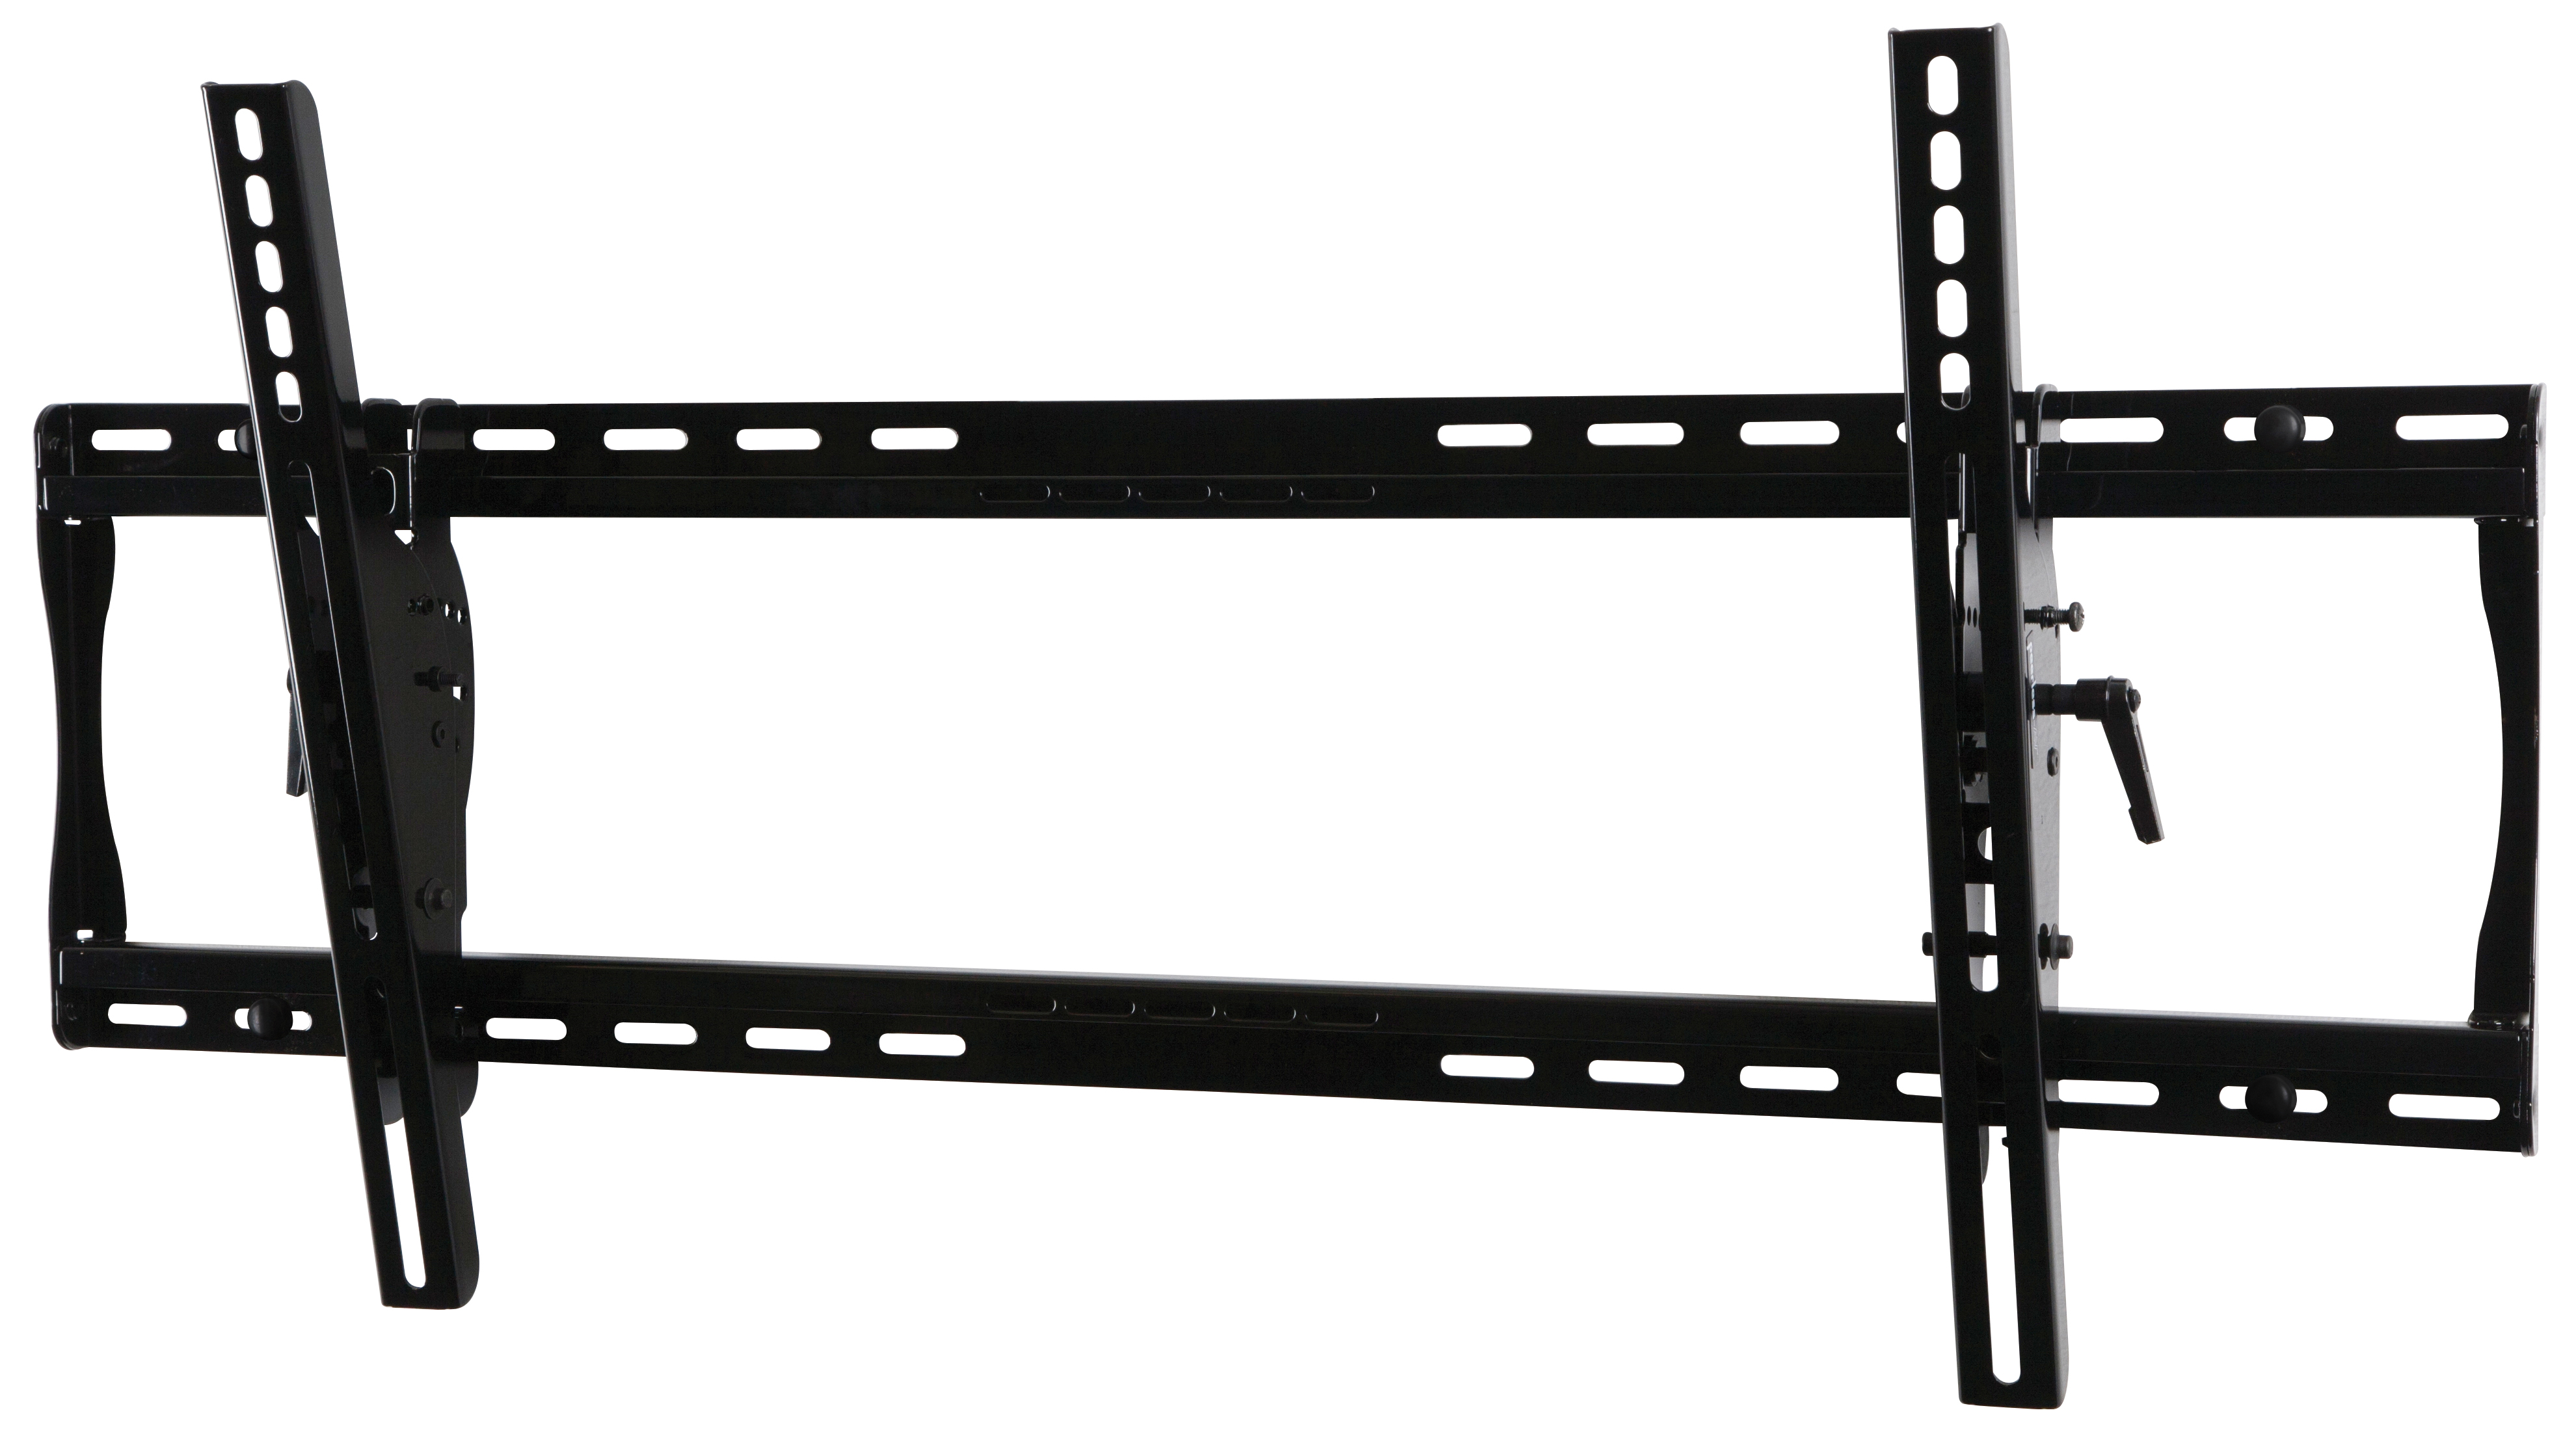 00 - PT660 Paramount Universal Tilt Wall Mount for 39" to 90" Displays